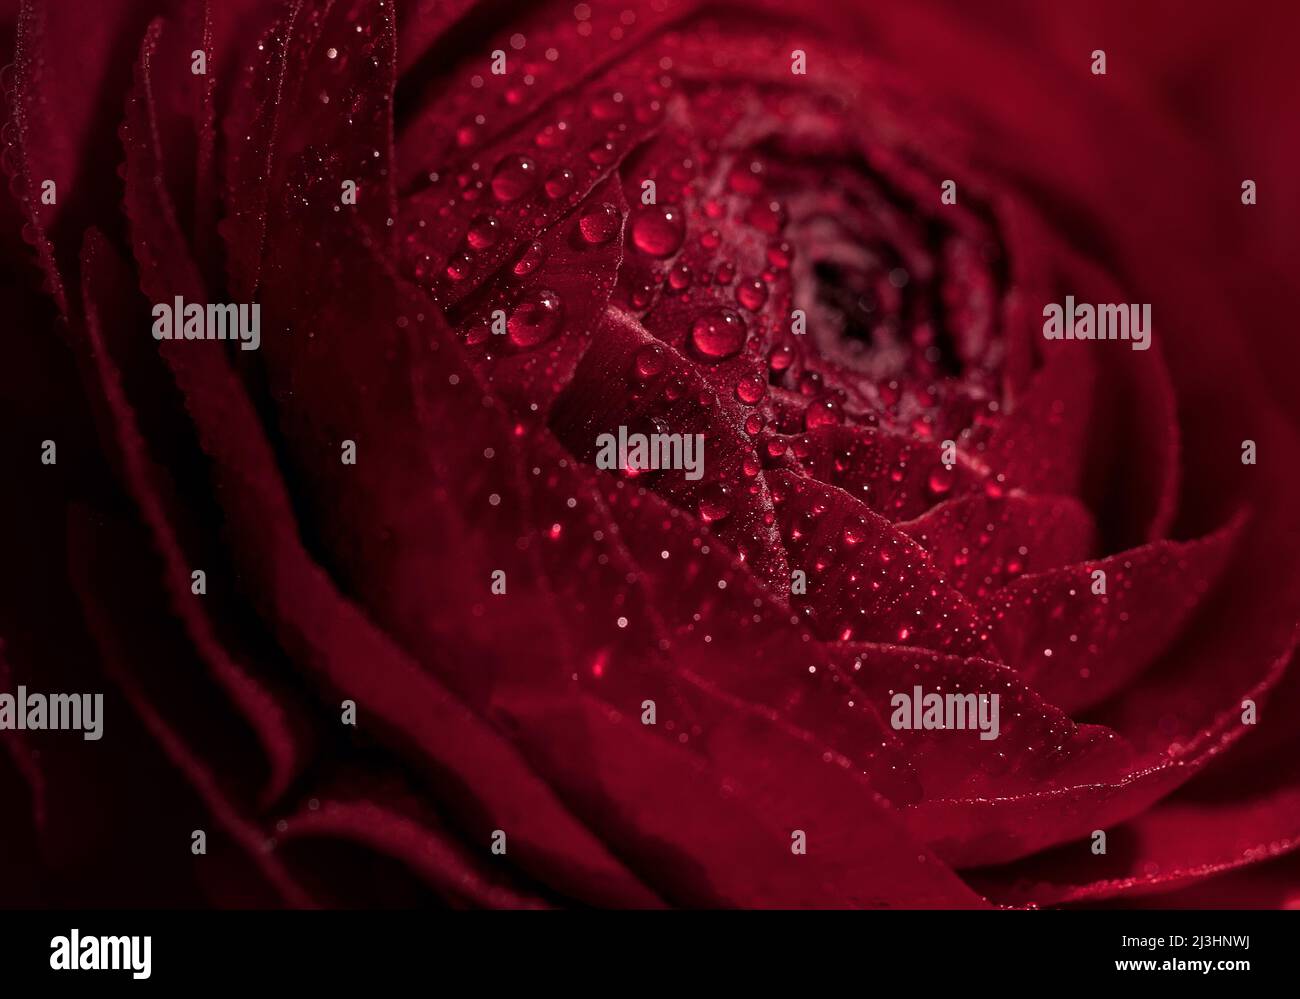 blooming deep red flower wit water drops. floral background Stock Photo